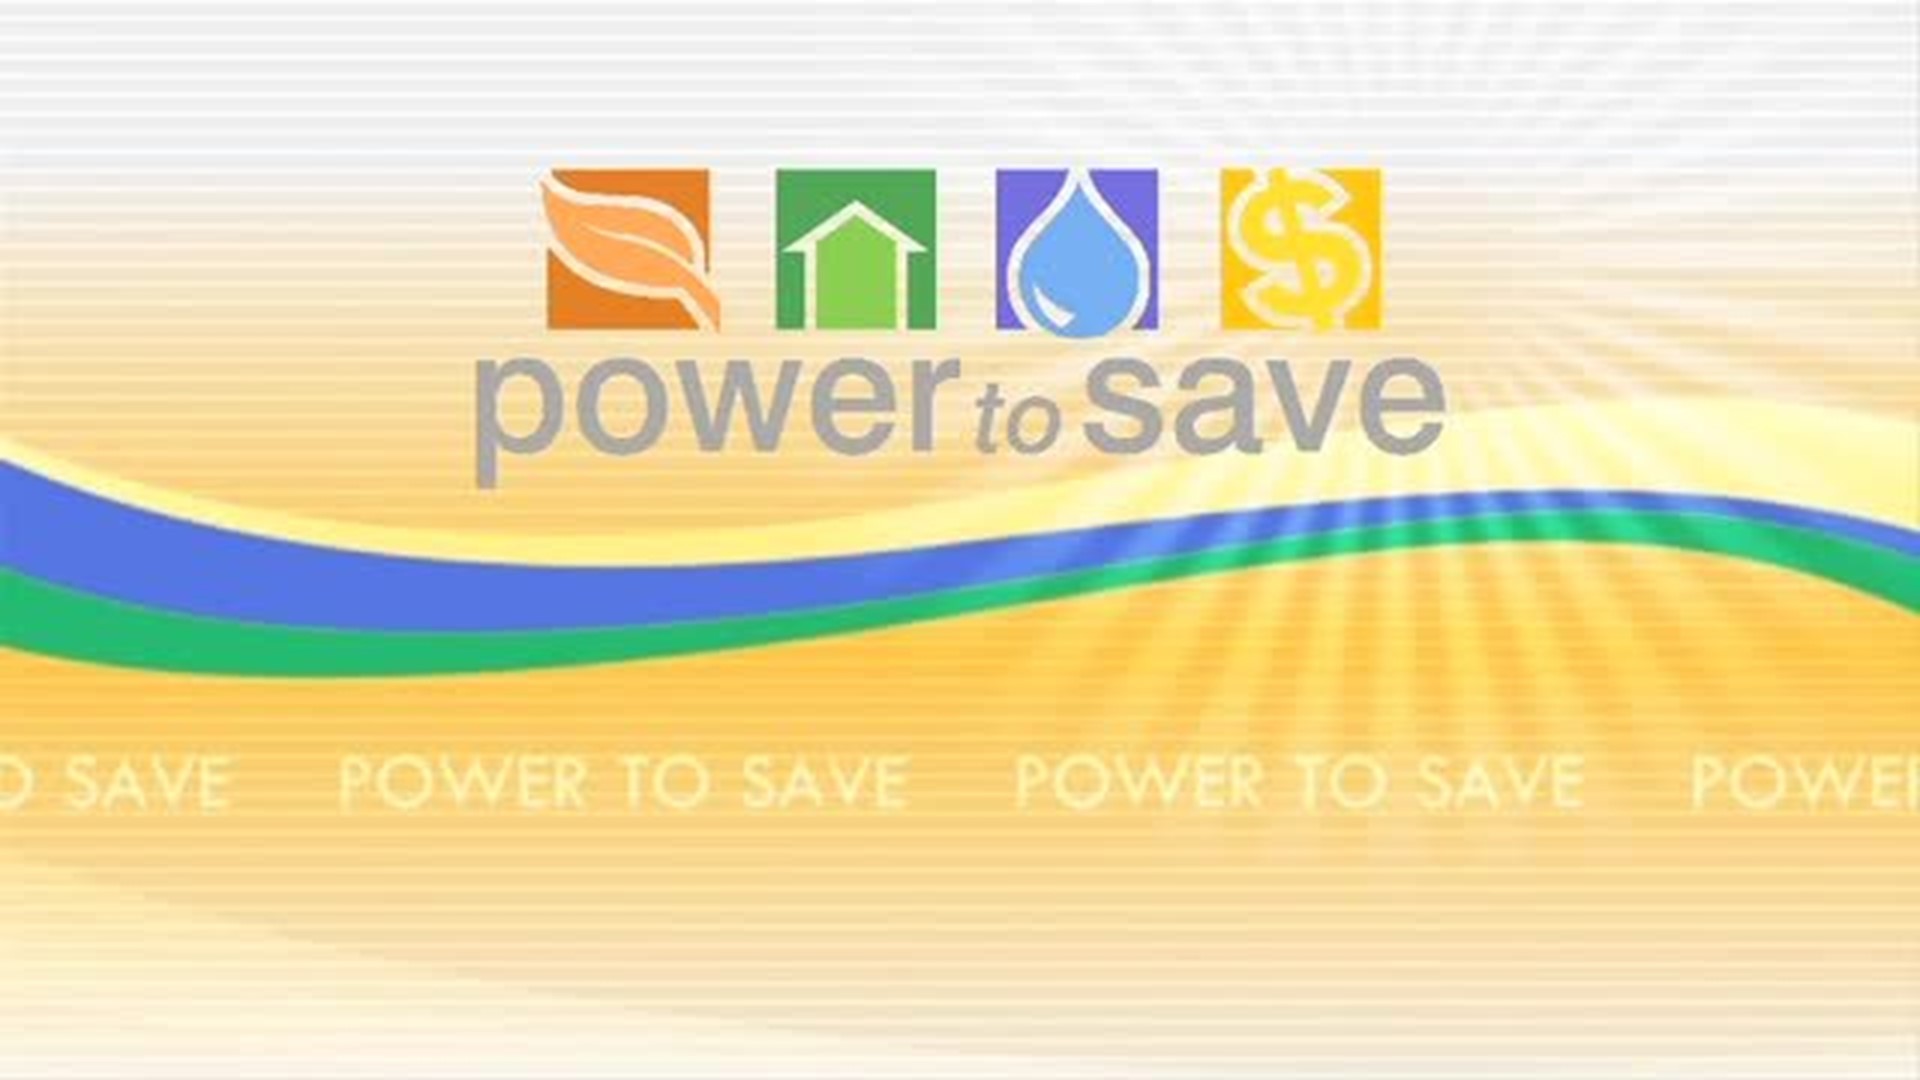 Power to Save: September 2013 (3)